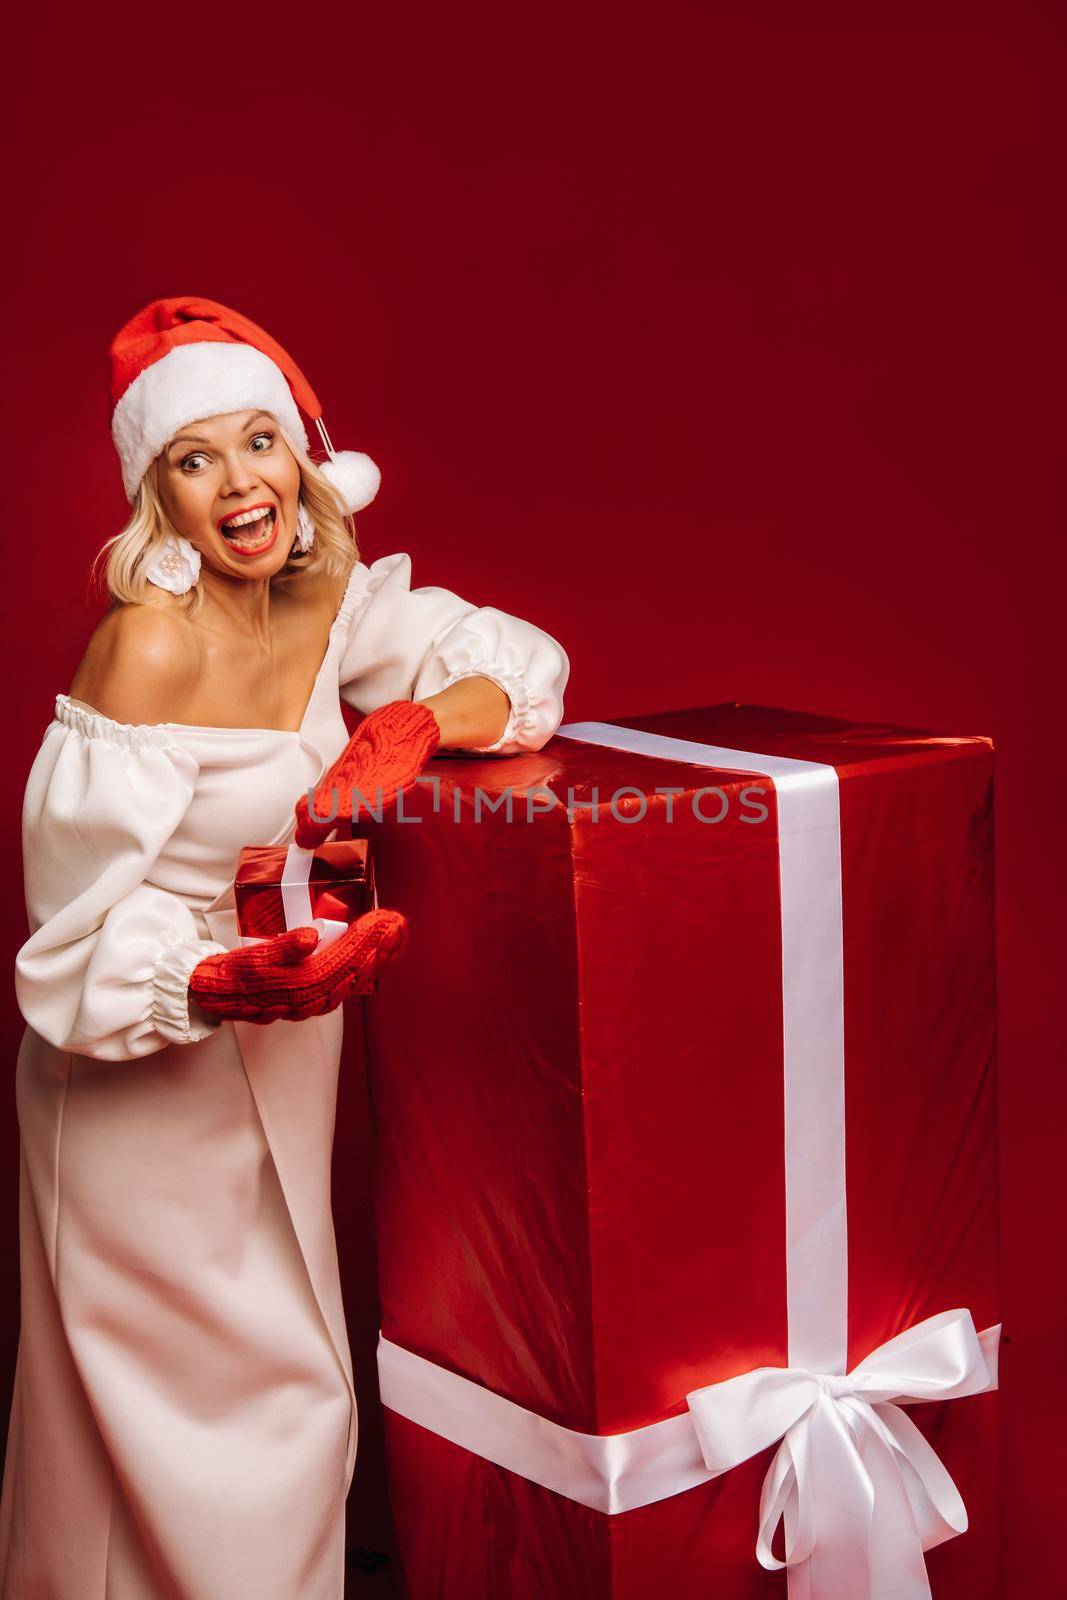 portrait of a smiling girl in a white dress and Santa hat with a Christmas gift on a red background.